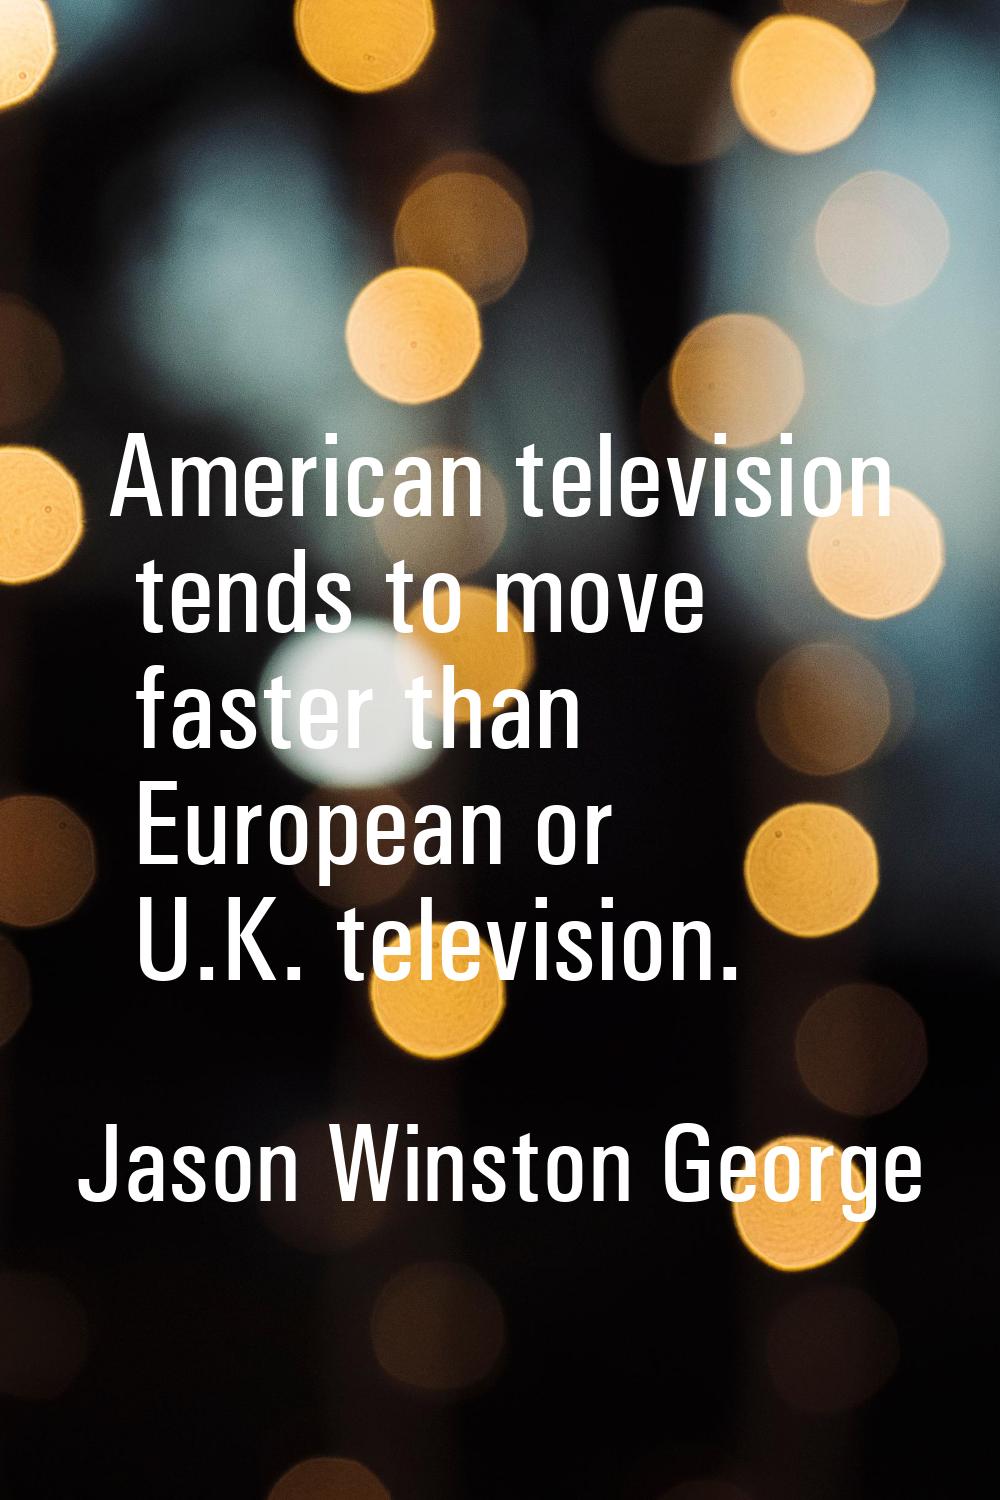 American television tends to move faster than European or U.K. television.